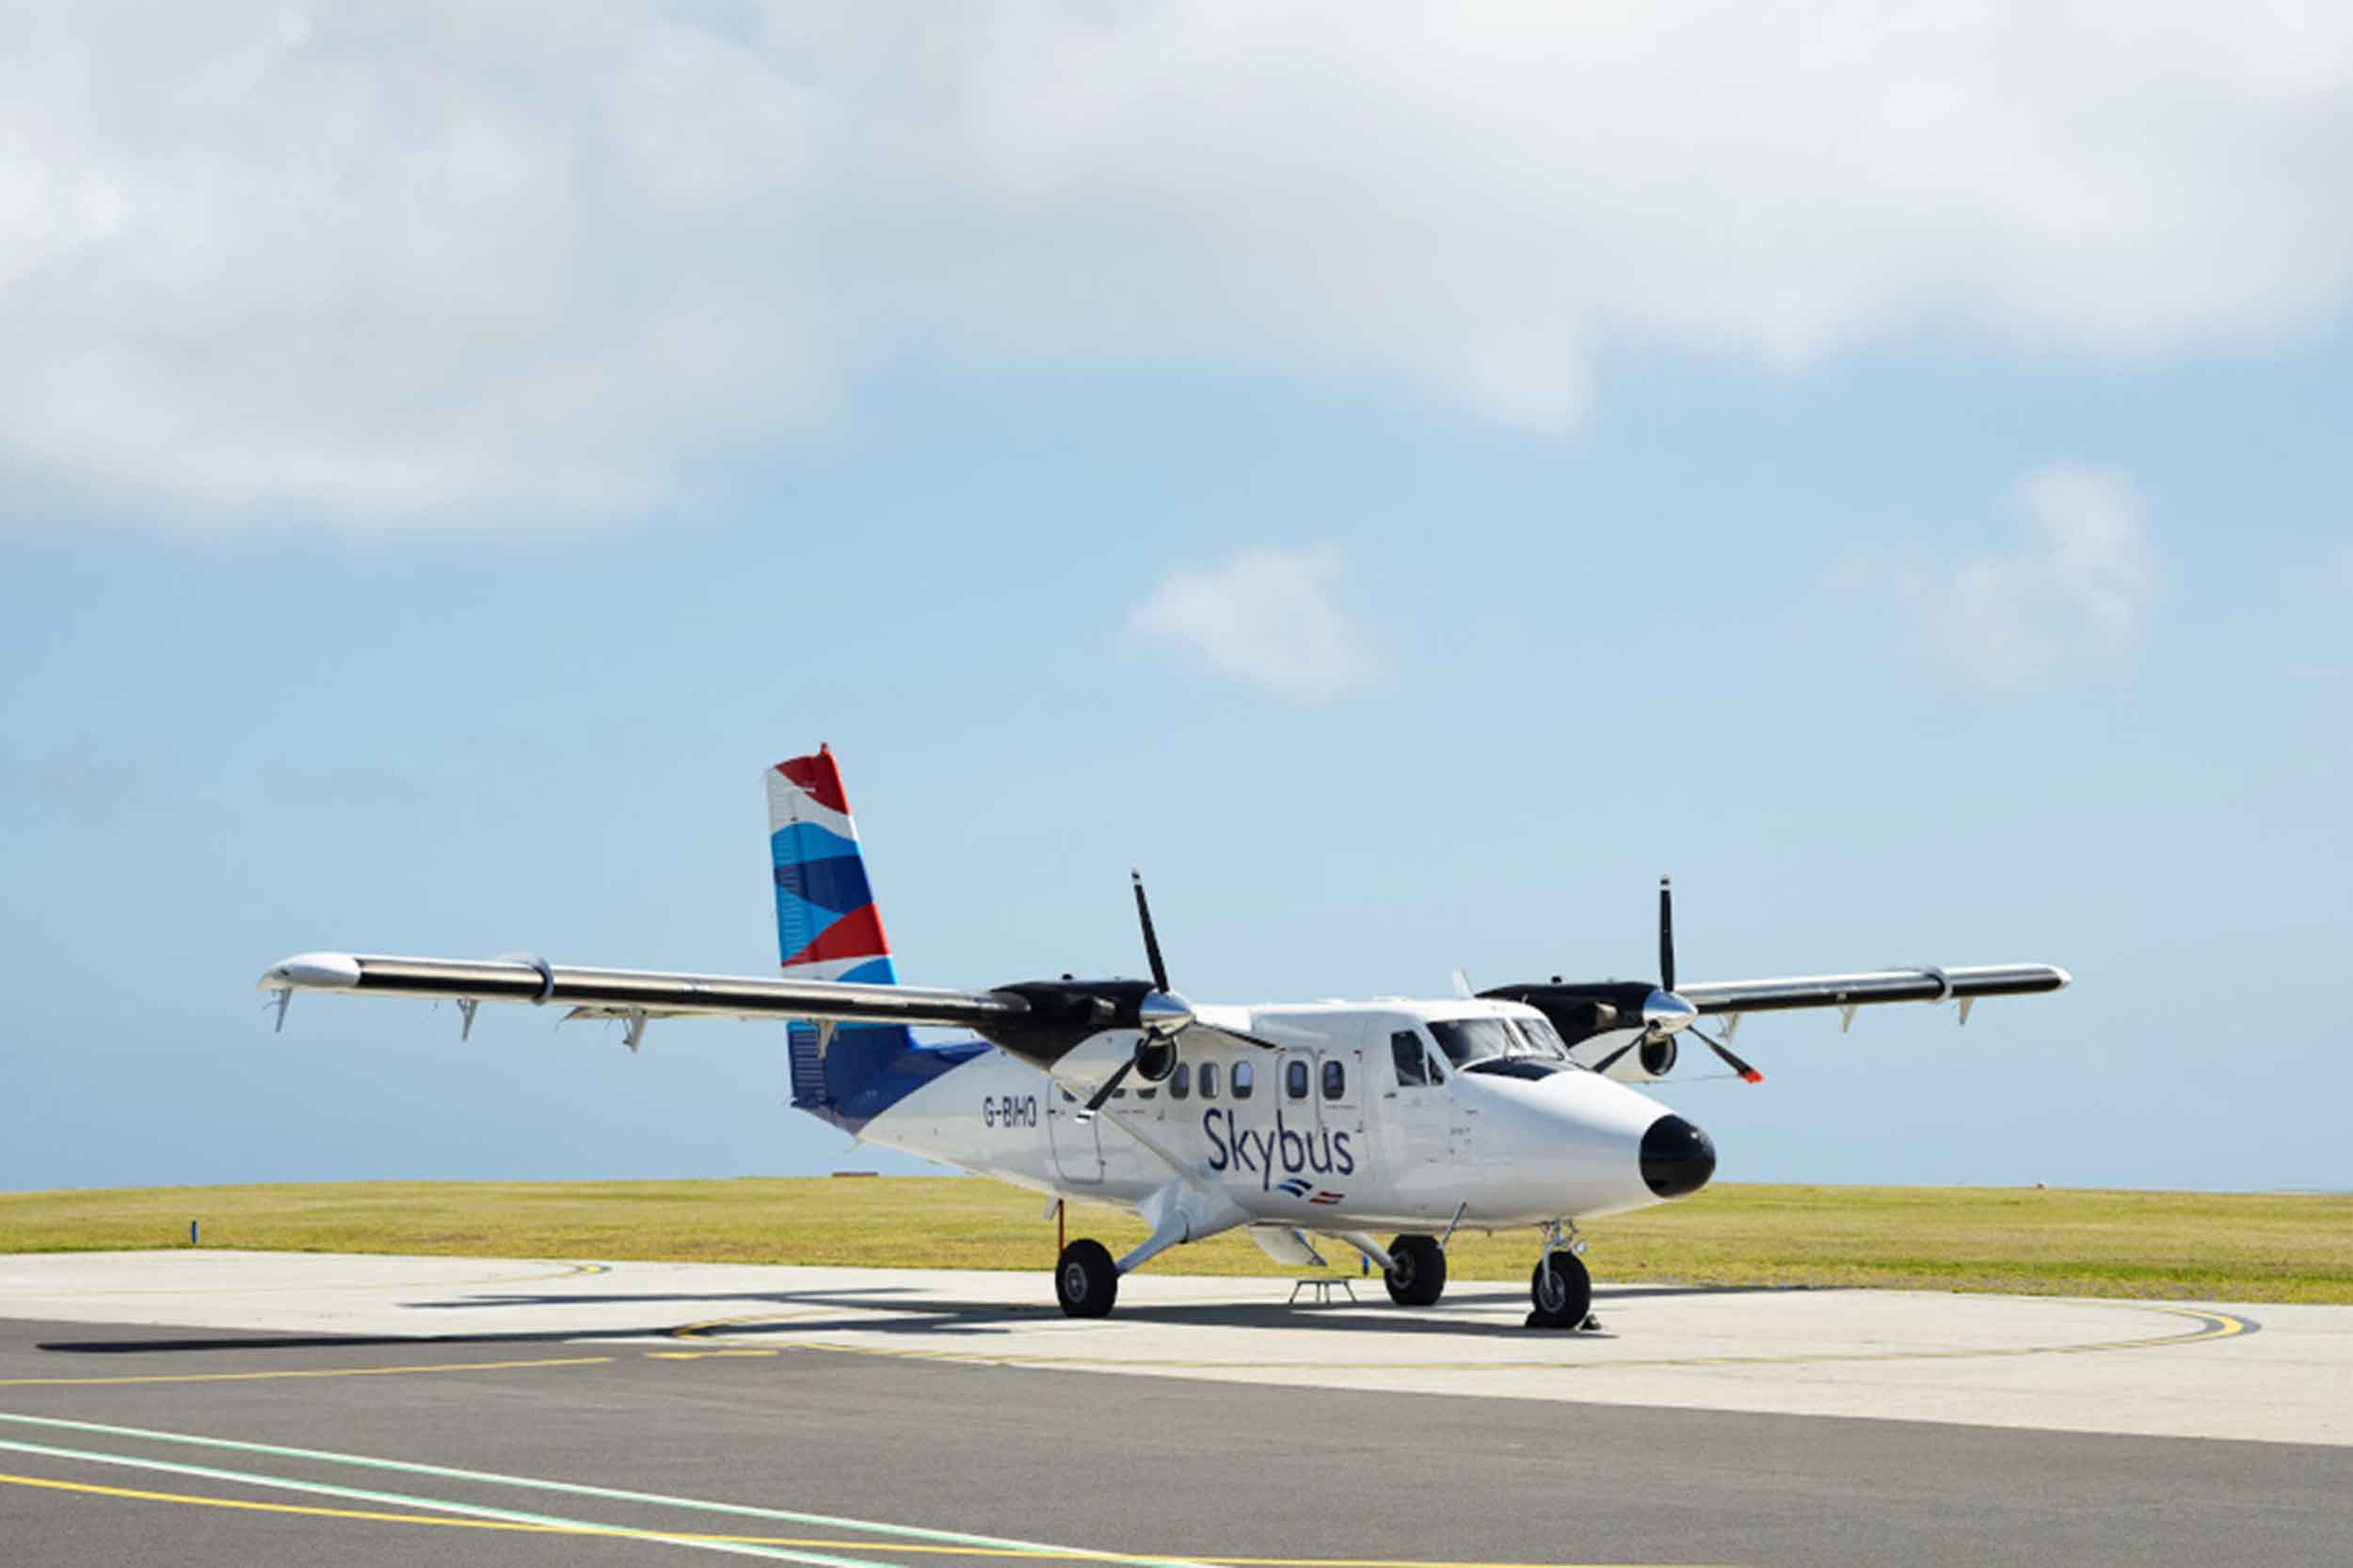 Scilly Isles' Skybus